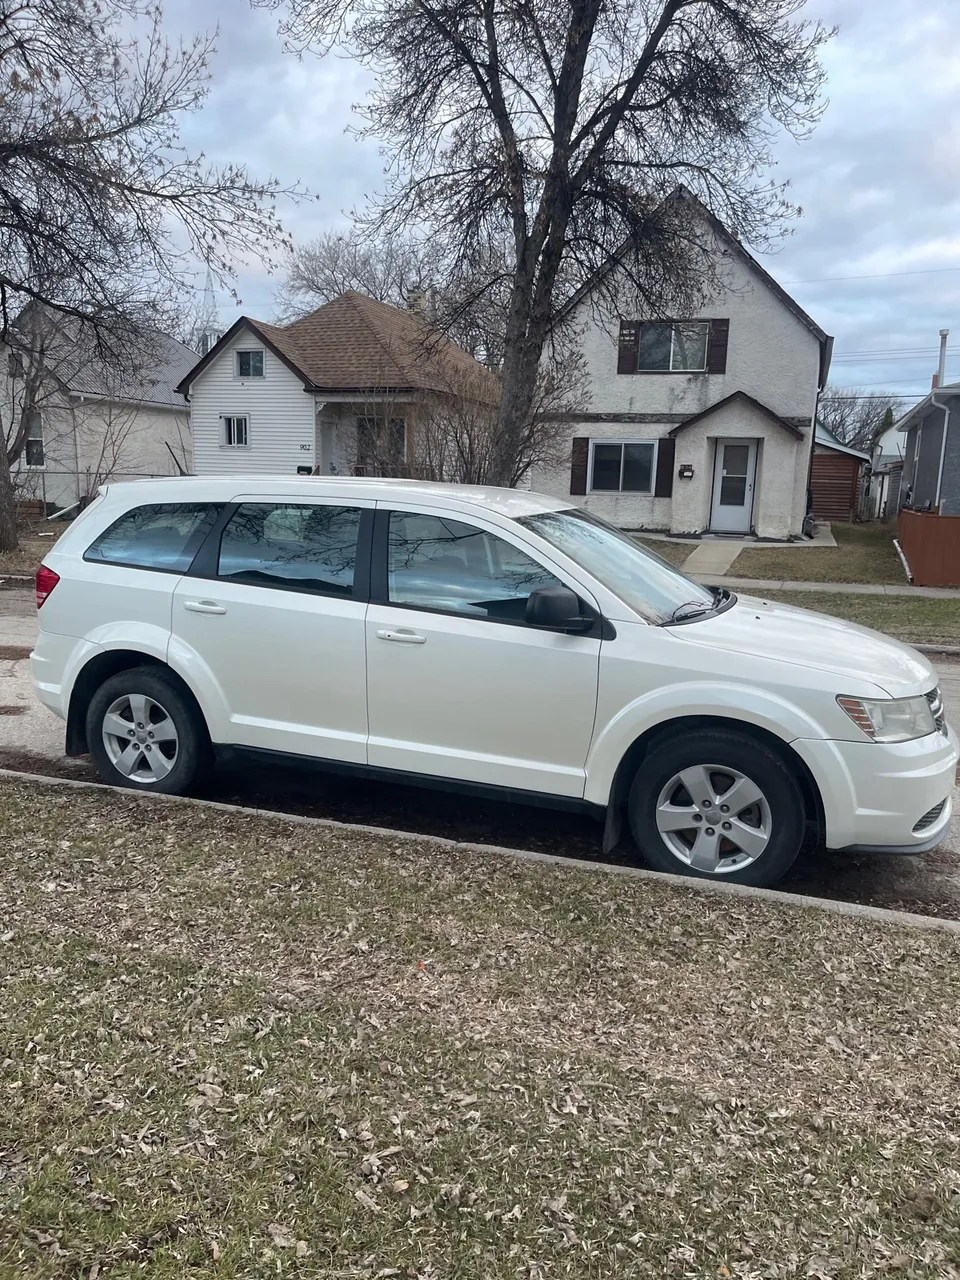 2015 dodge journey fresh safety fully loaded runs great